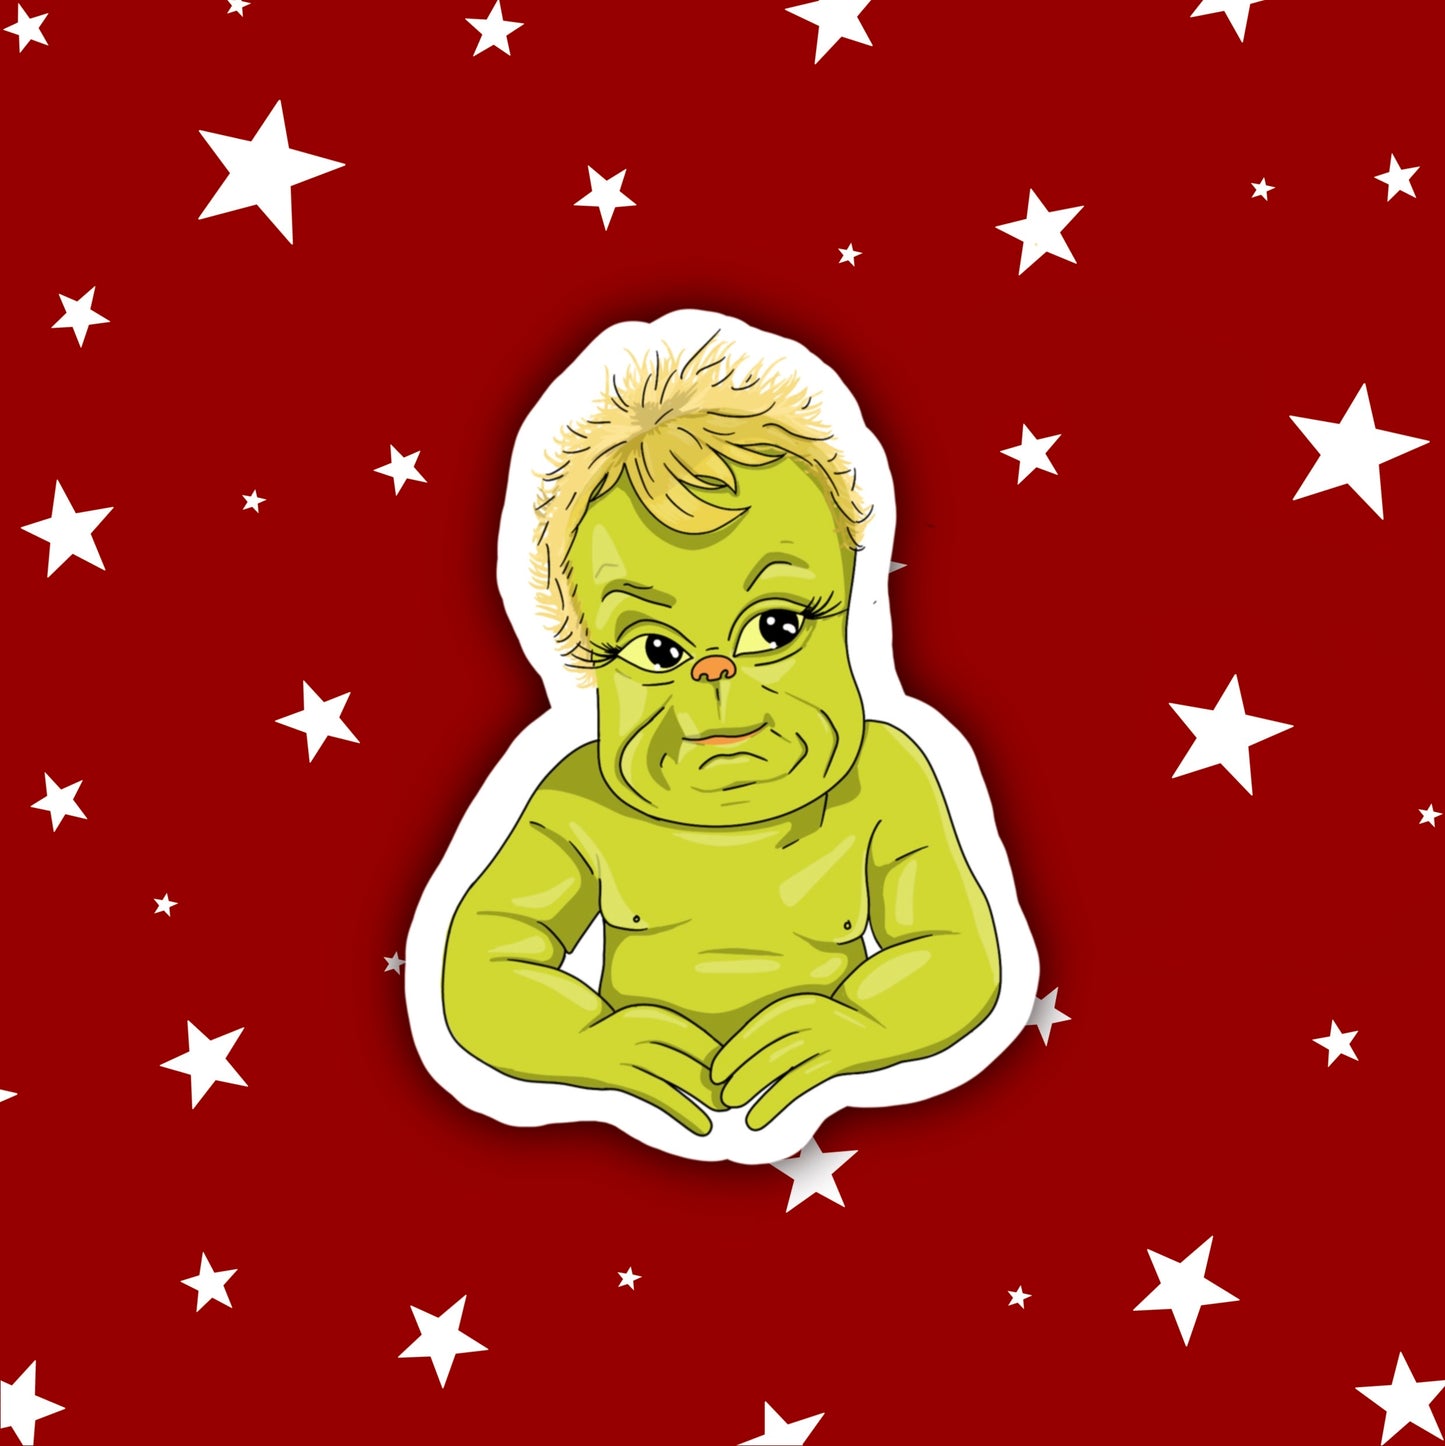 How the Grinch Stole Christmas Sticker Bundle | 9 Stickers | The Grinch